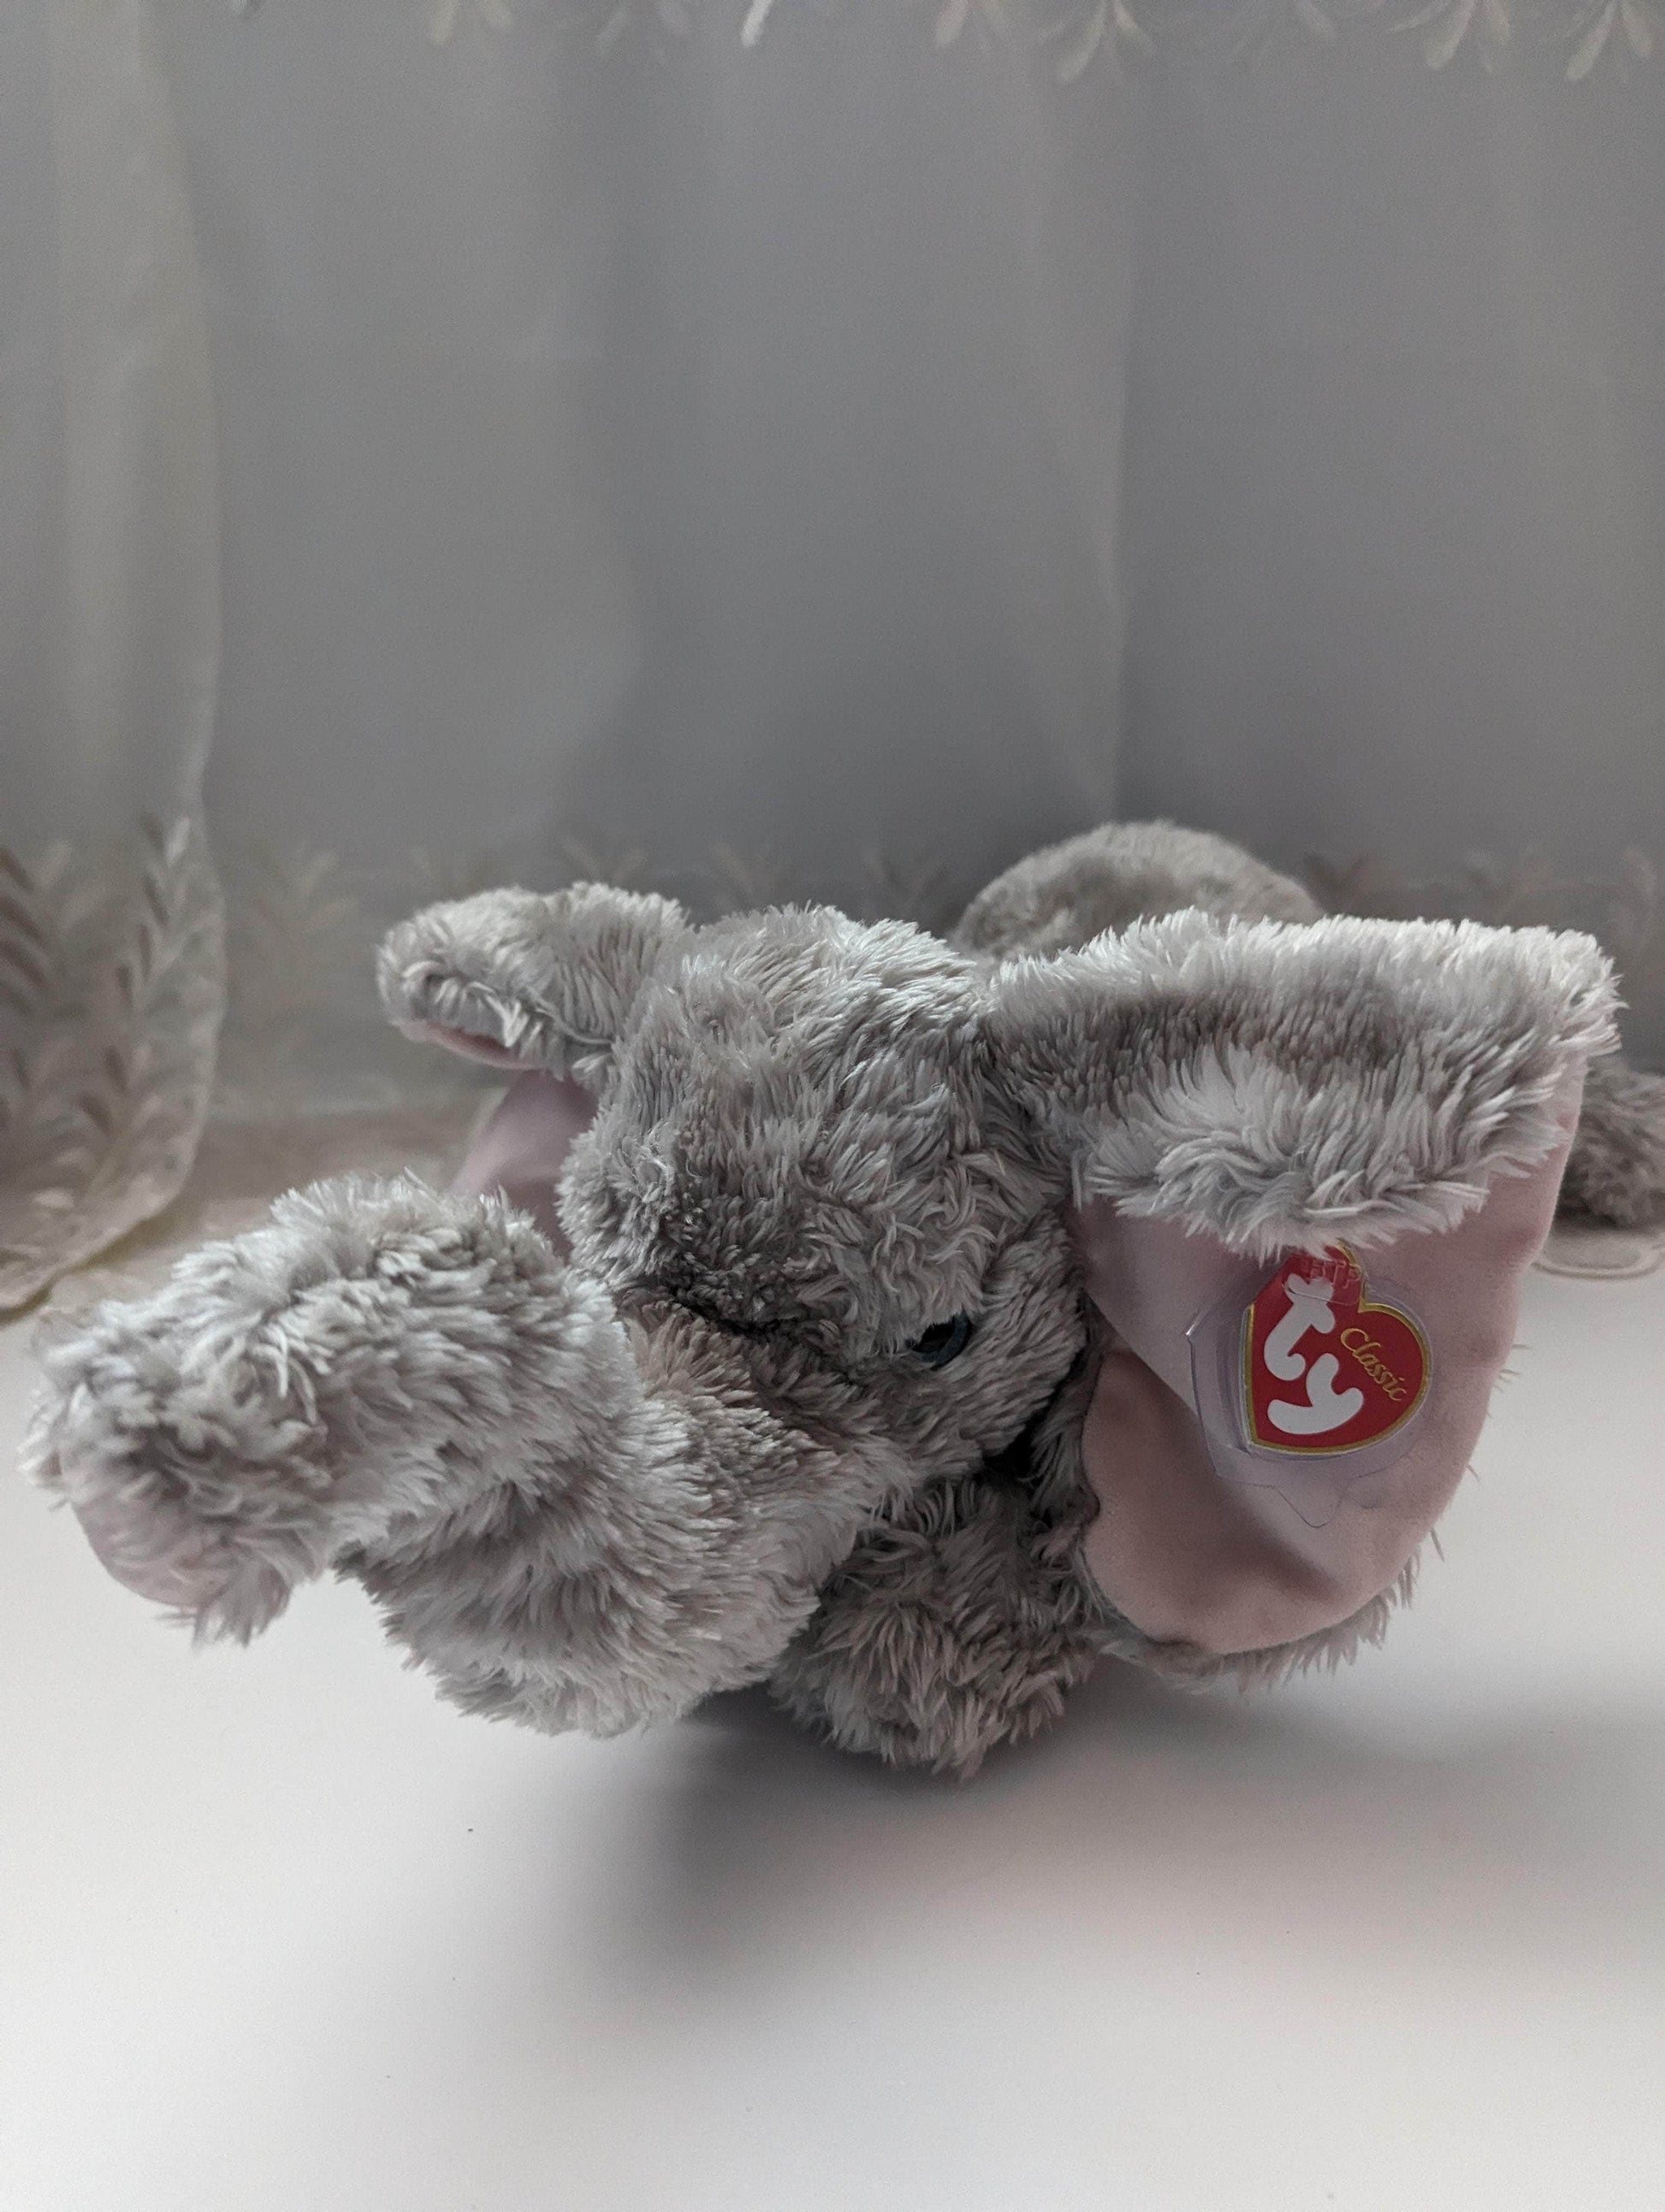 Ty Classic Collection - Teensy The Gray Elephant (19in) Waiting On The Tag - Vintage Beanies Canada